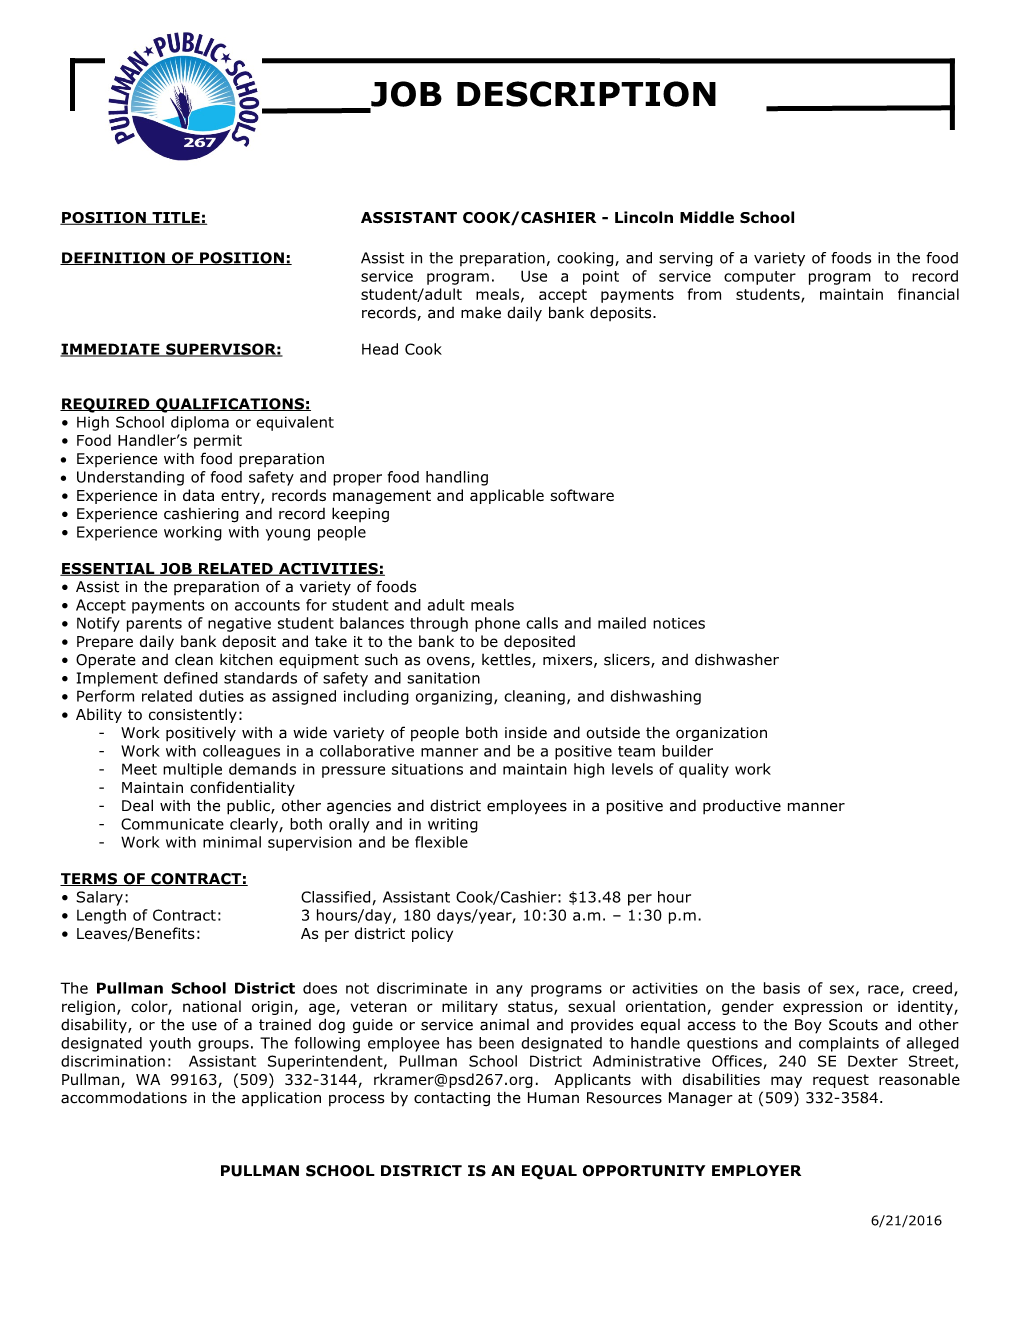 POSITION TITLE: ASSISTANT COOK/CASHIER - Lincoln Middle School